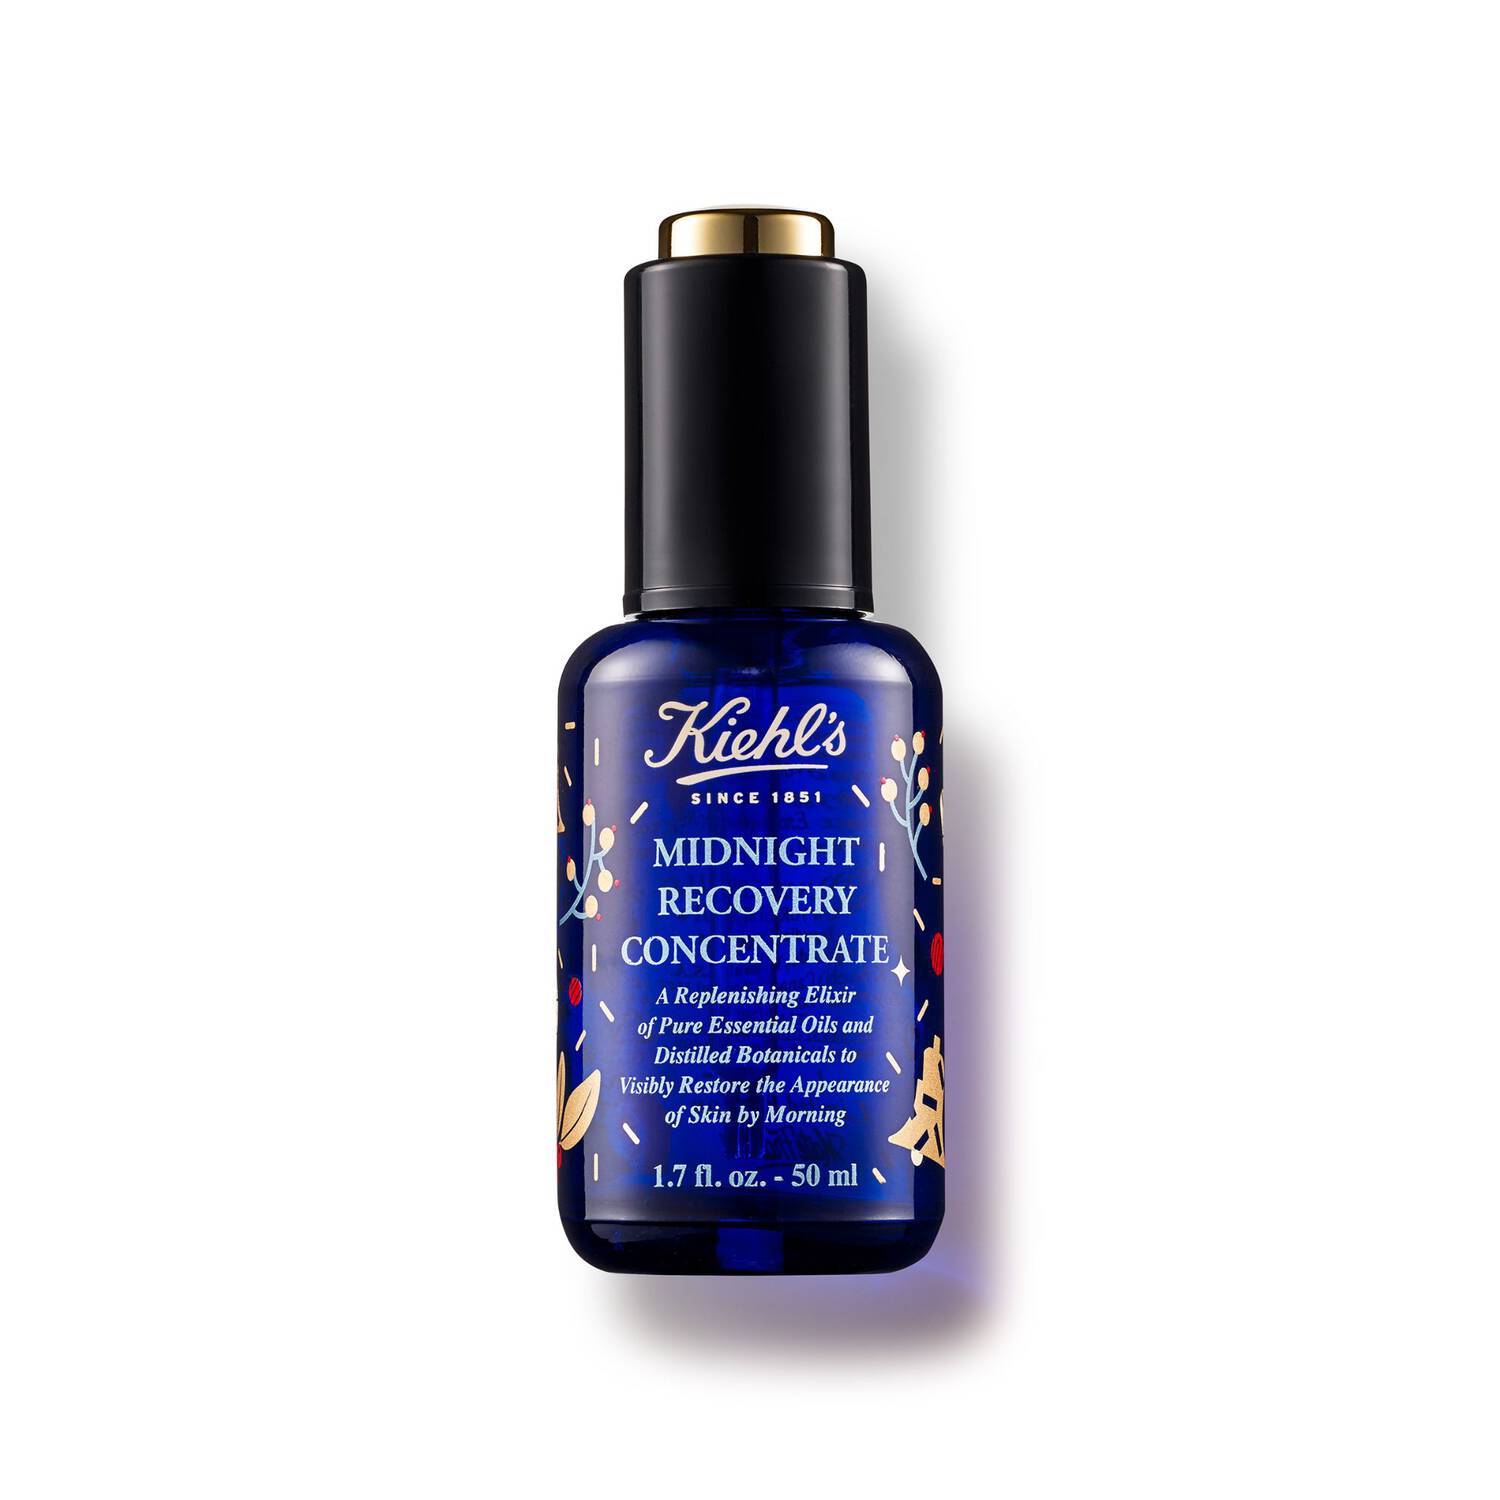 Kiehl's - Midnight Recovery Concentrate - Limited Edition